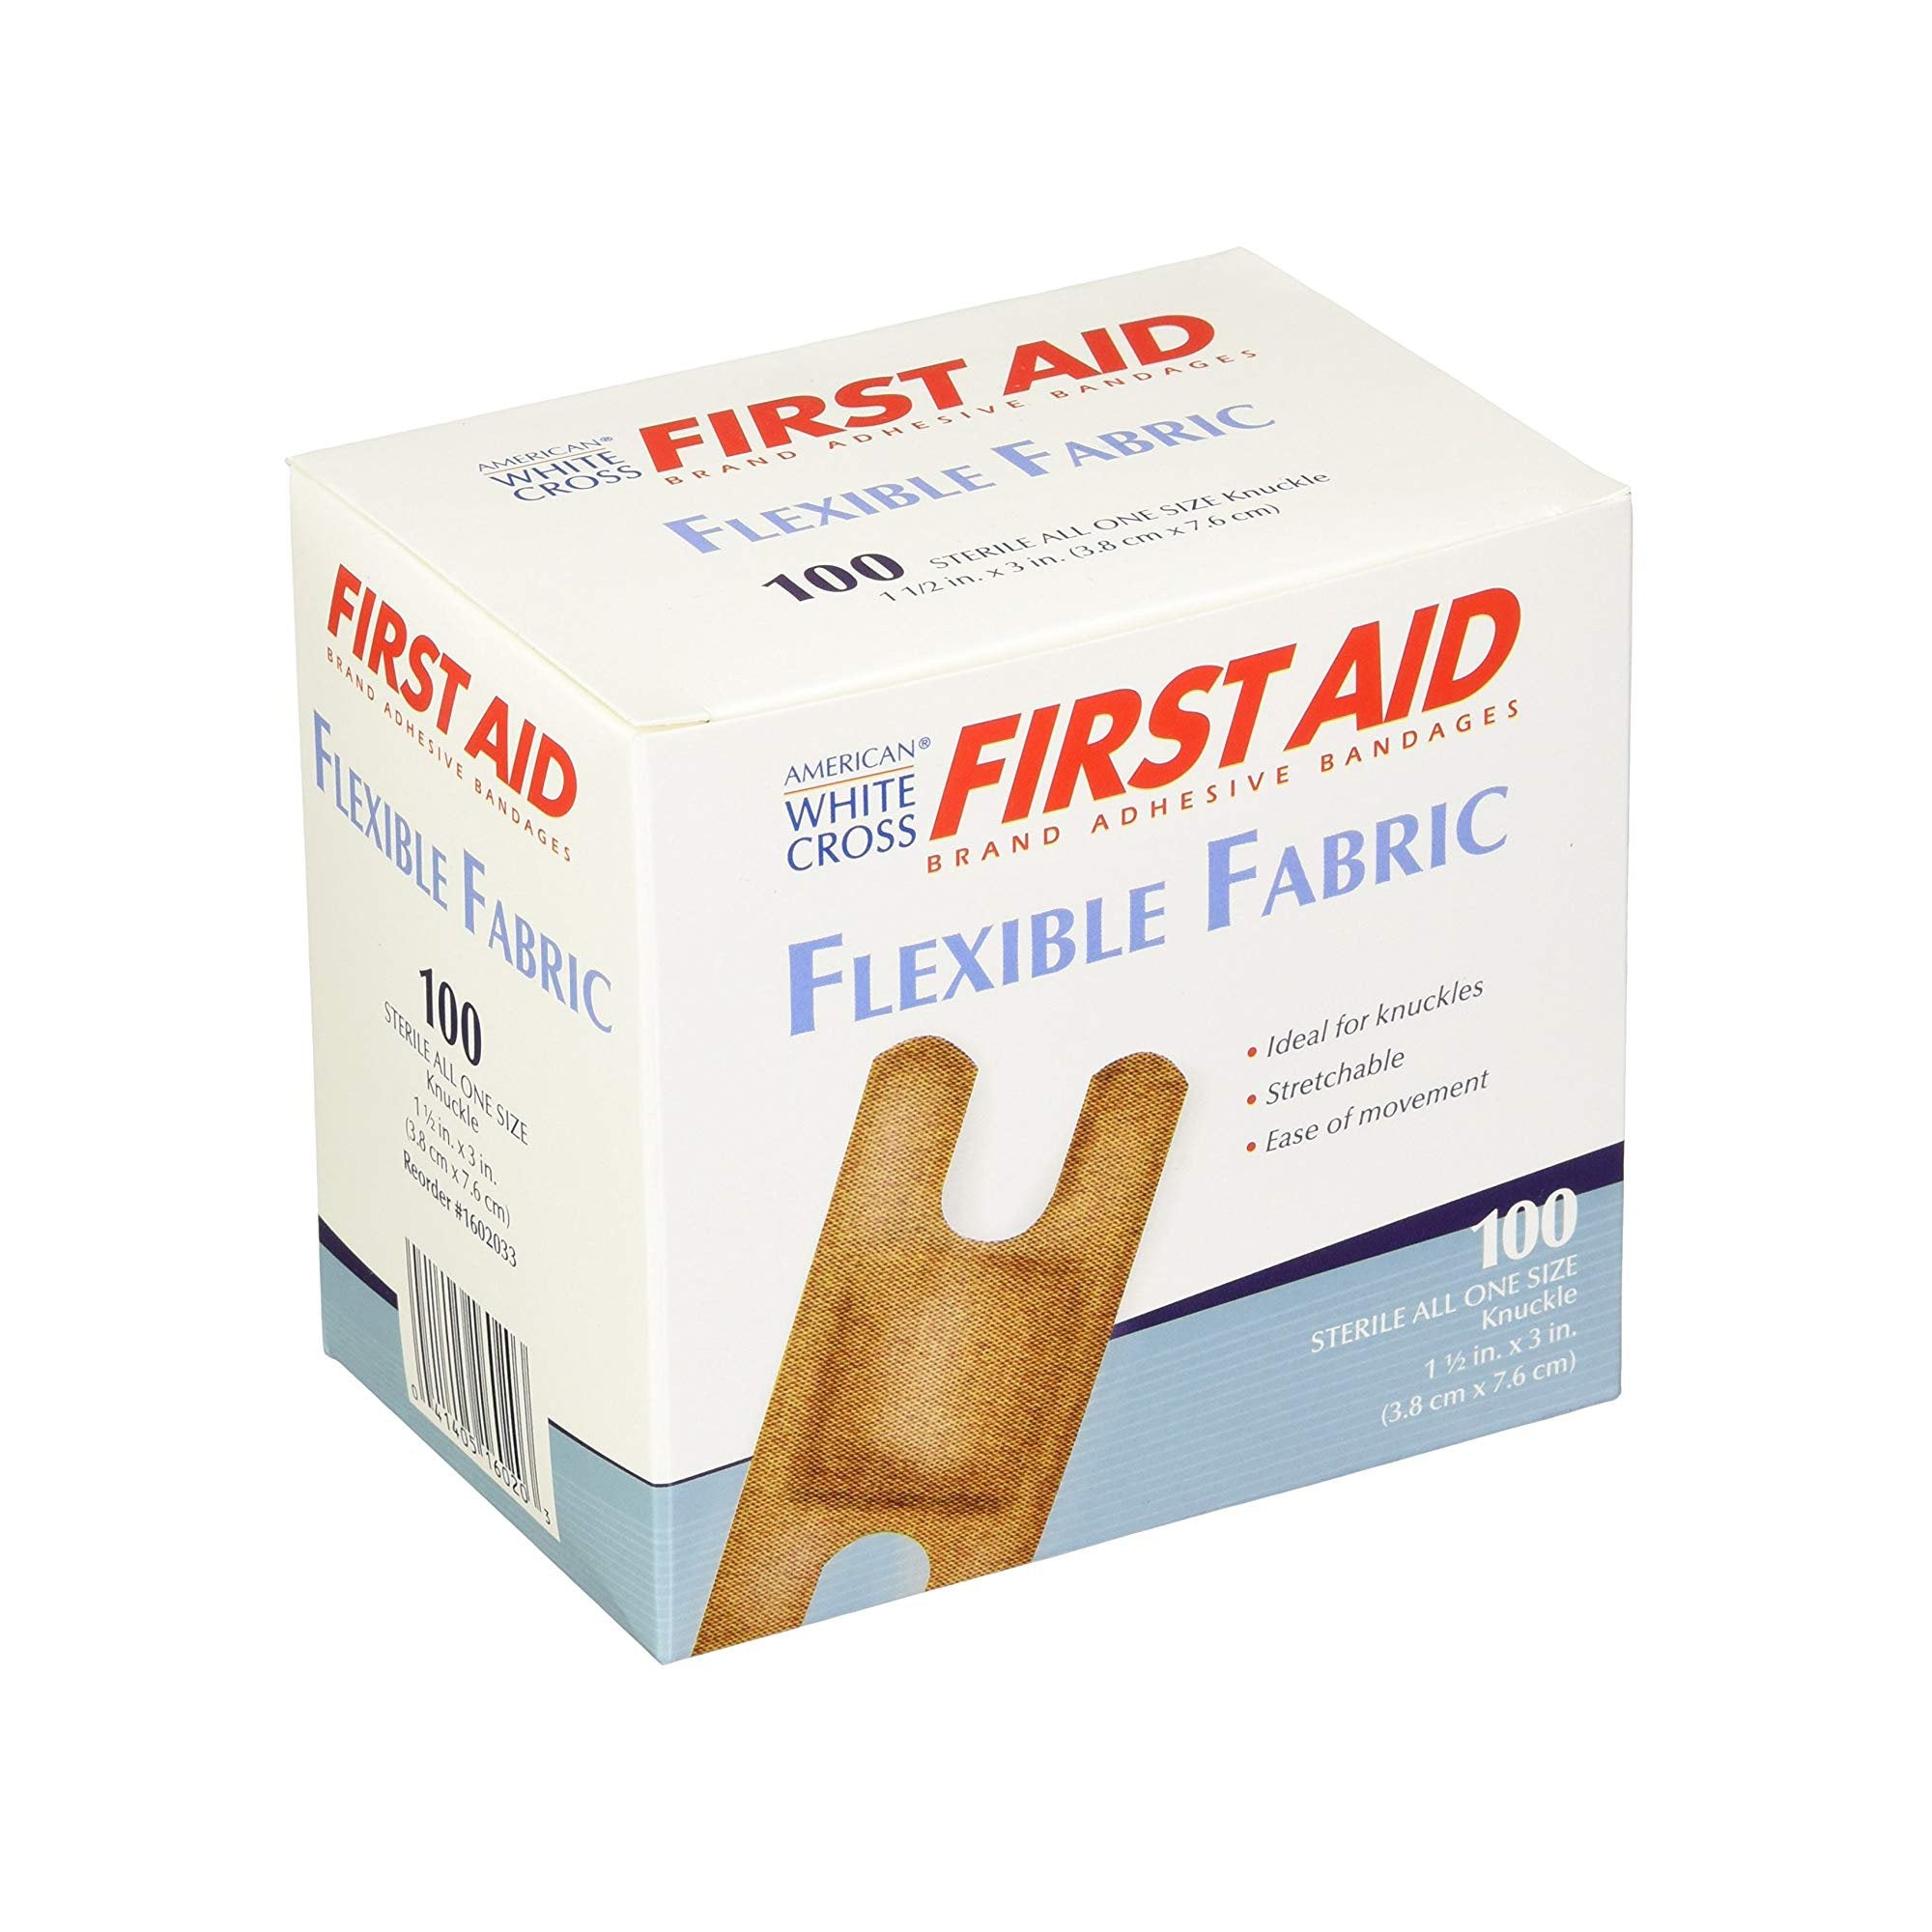 Adhesive Strip American® White Cross 1-1/2 X 3 Inch Fabric Knuckle Tan Sterile